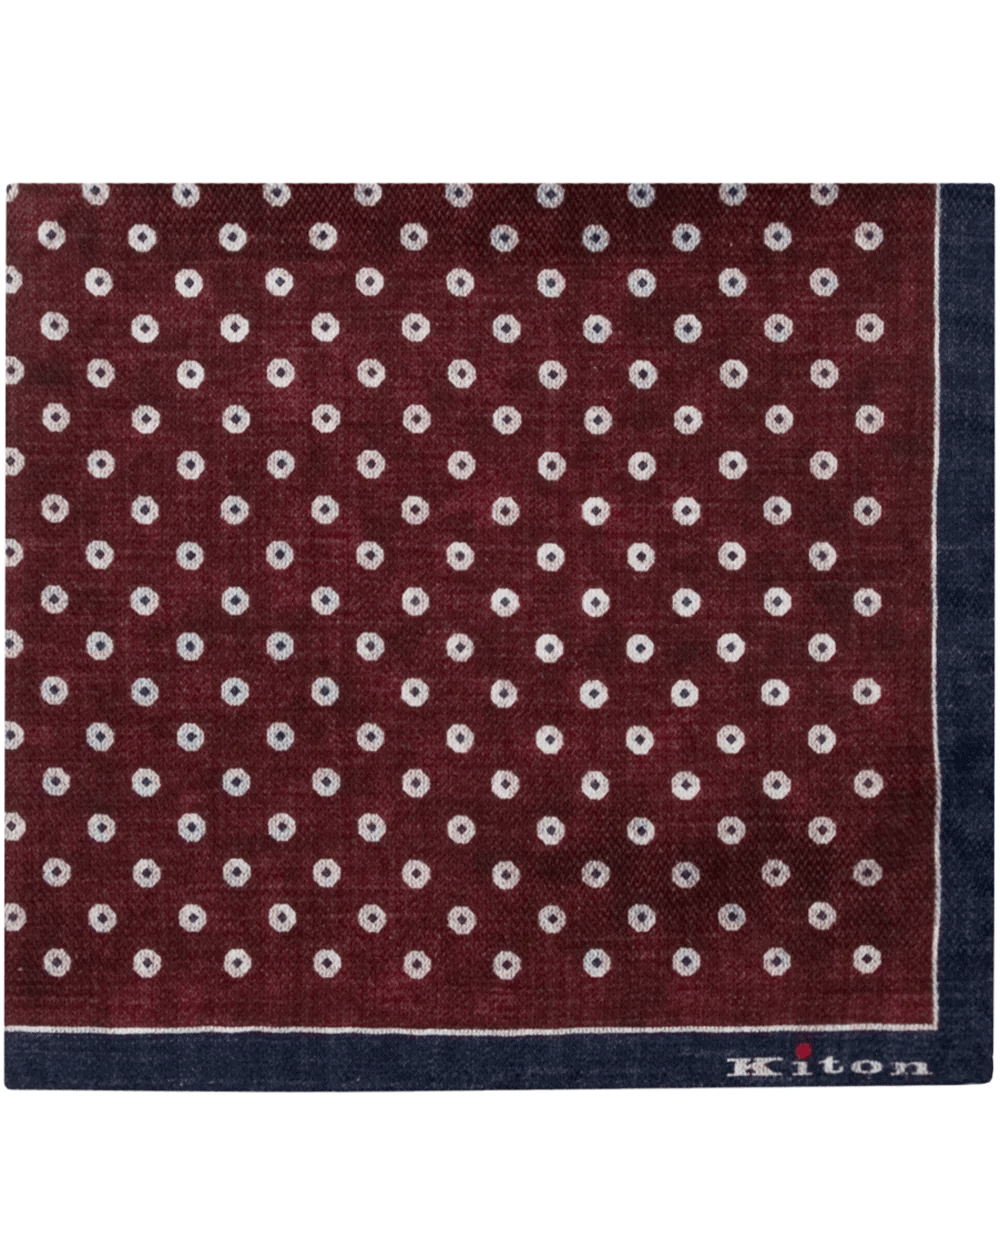 Navy and Burgundy Dots Houndstooth Reversible Pocket Square